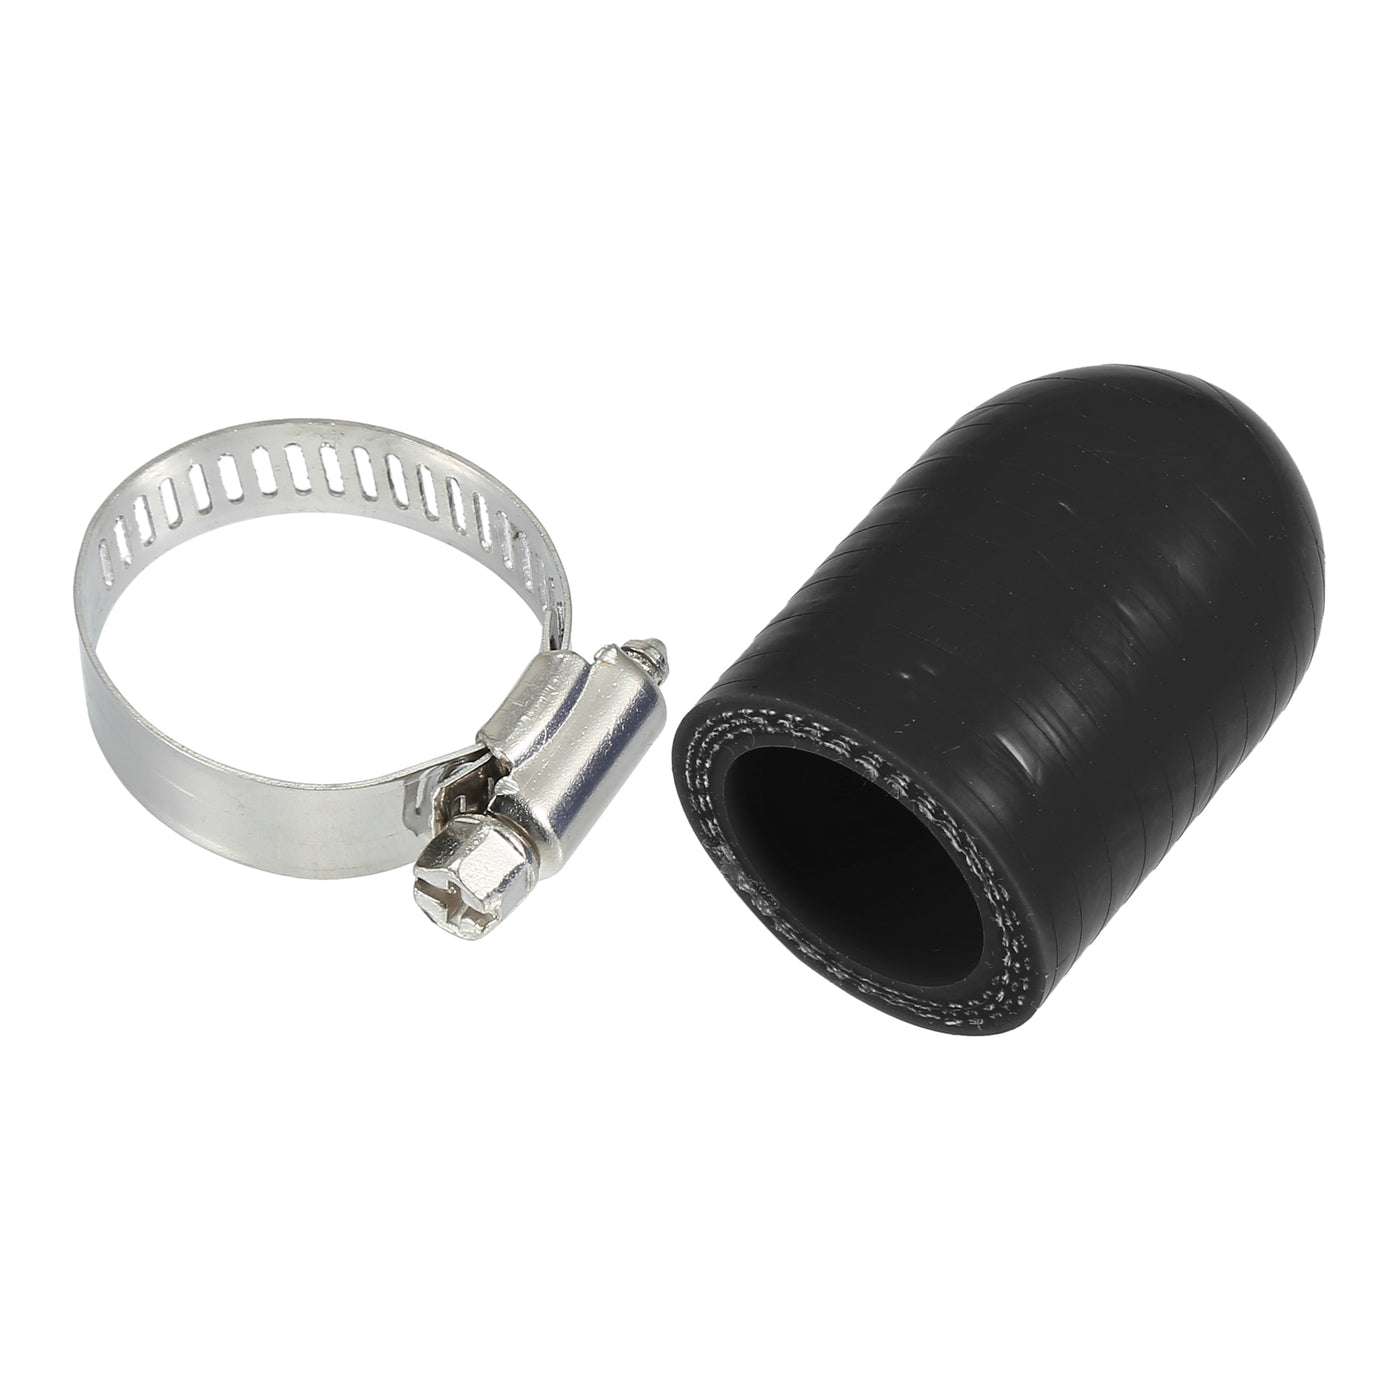 X AUTOHAUX 1 Set 30mm Length 22mm/0.87" ID Black Car Silicone Rubber Hose End Cap with Clamps Silicone Reinforced Blanking Cap for Bypass Tube Universal